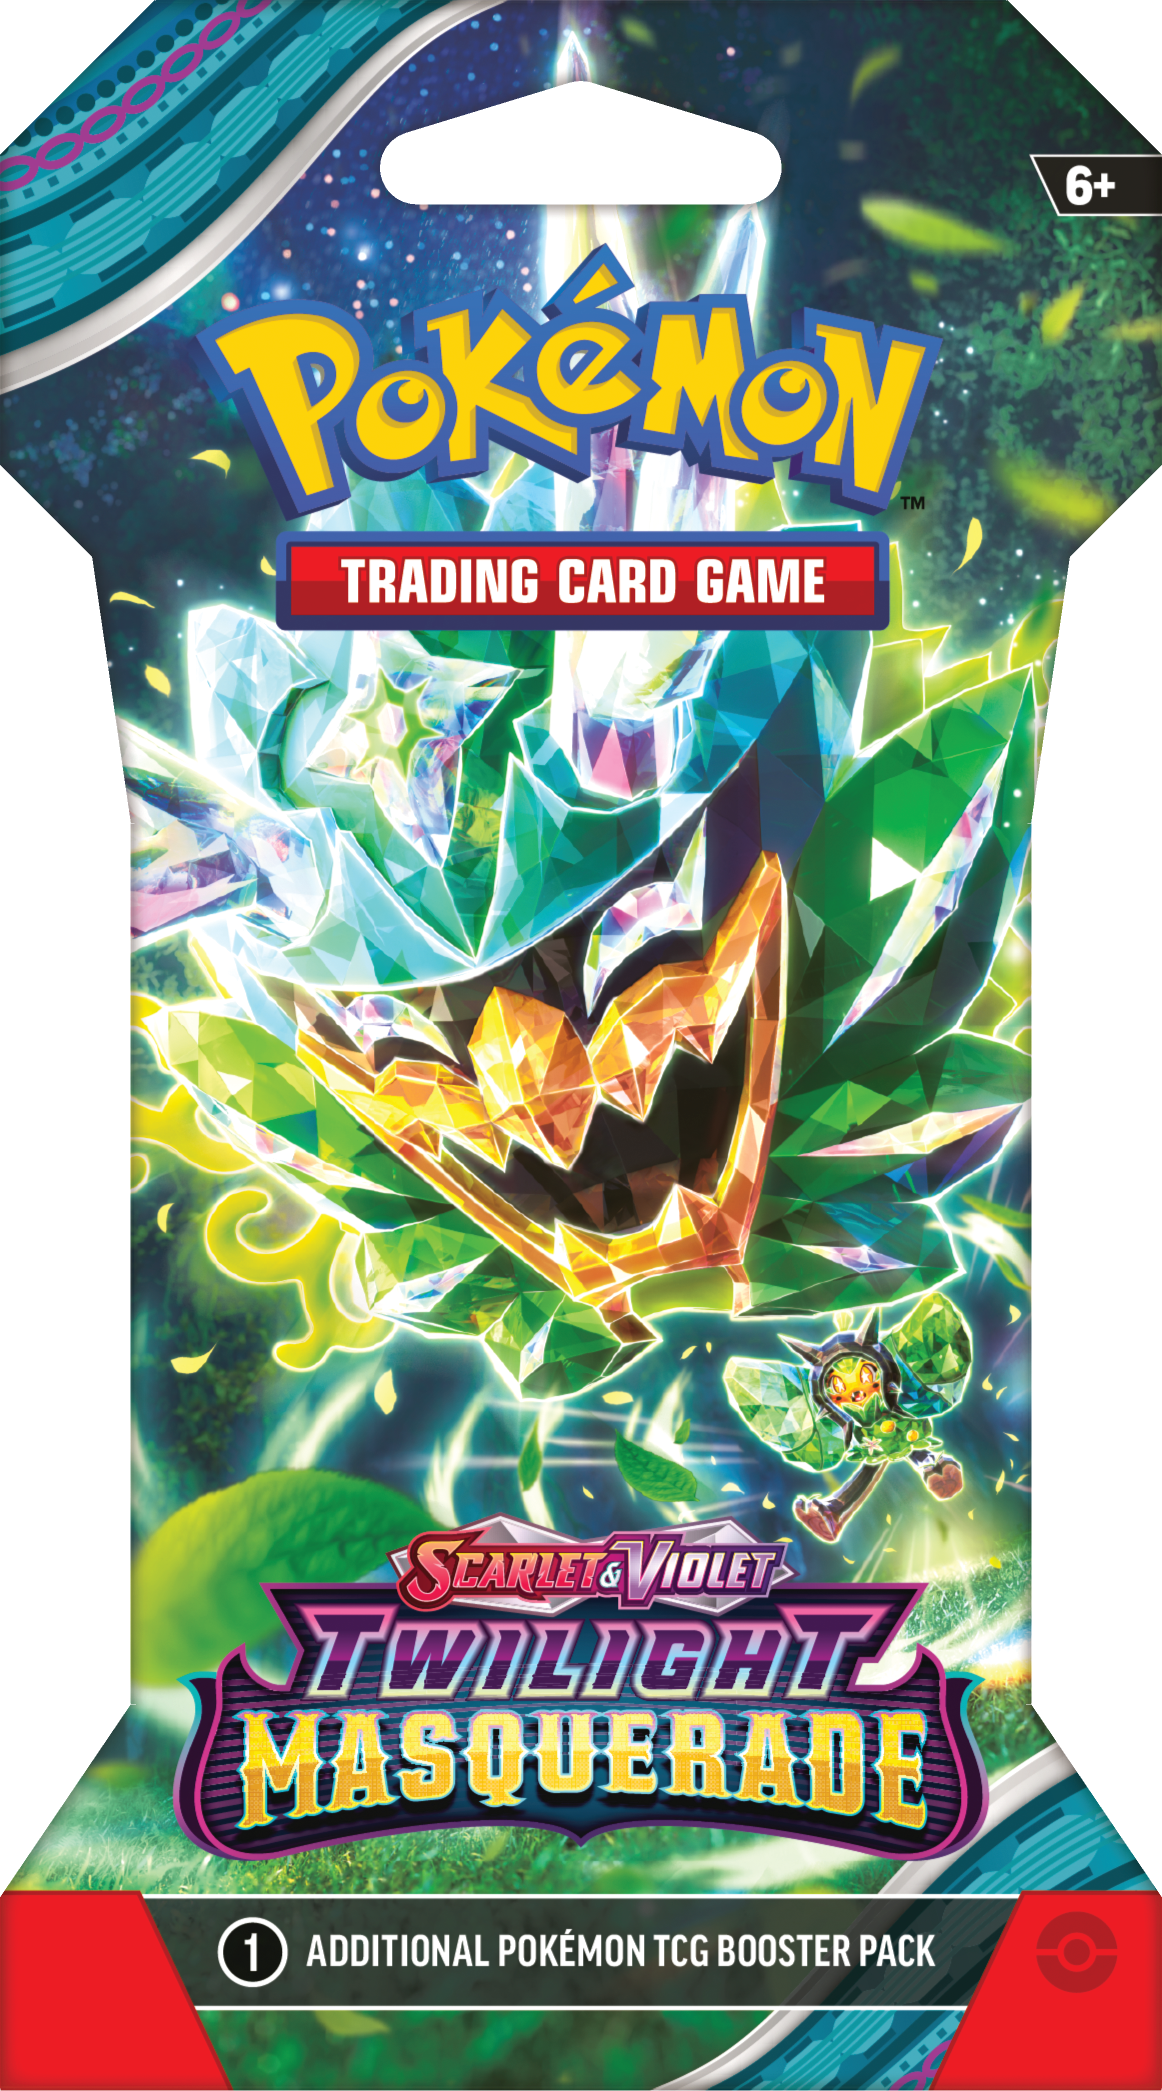 Pokemon Trading Card Game: Twilight Masquerade Sleeved Booster (Styles May Vary)